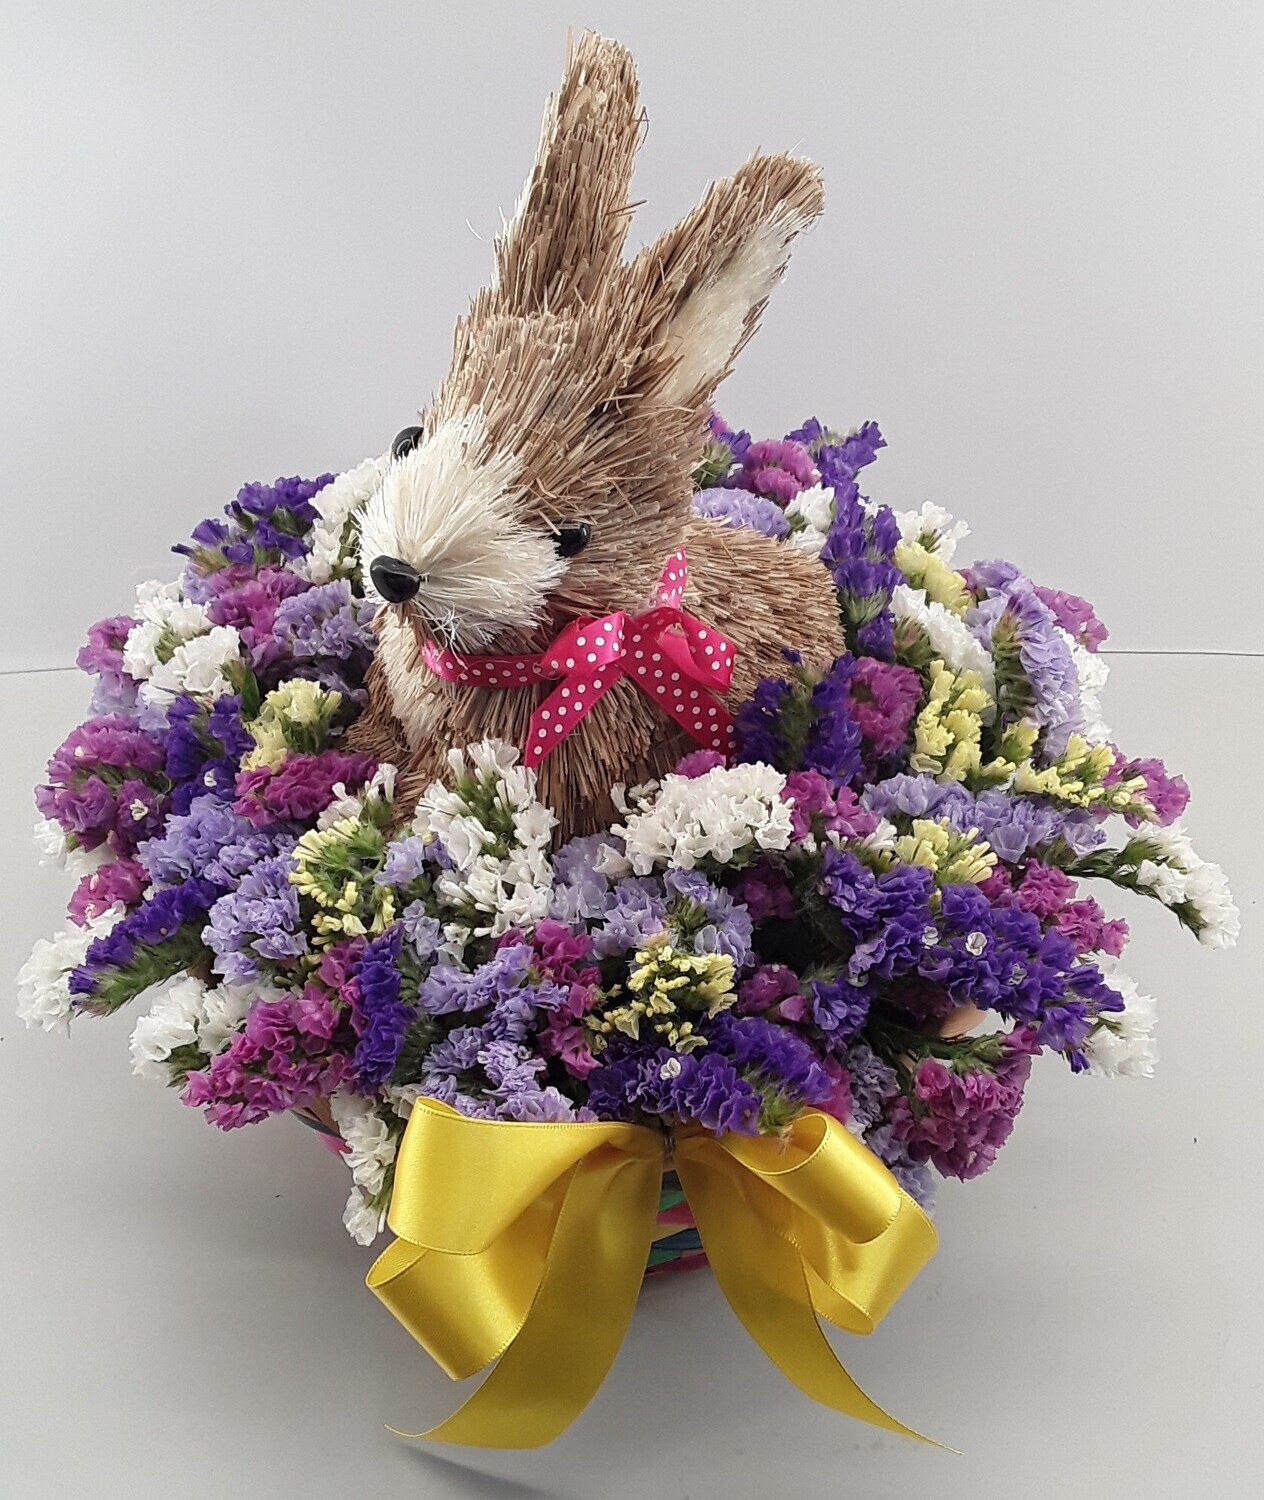 E2--Easter creation with "athanato" in a basket